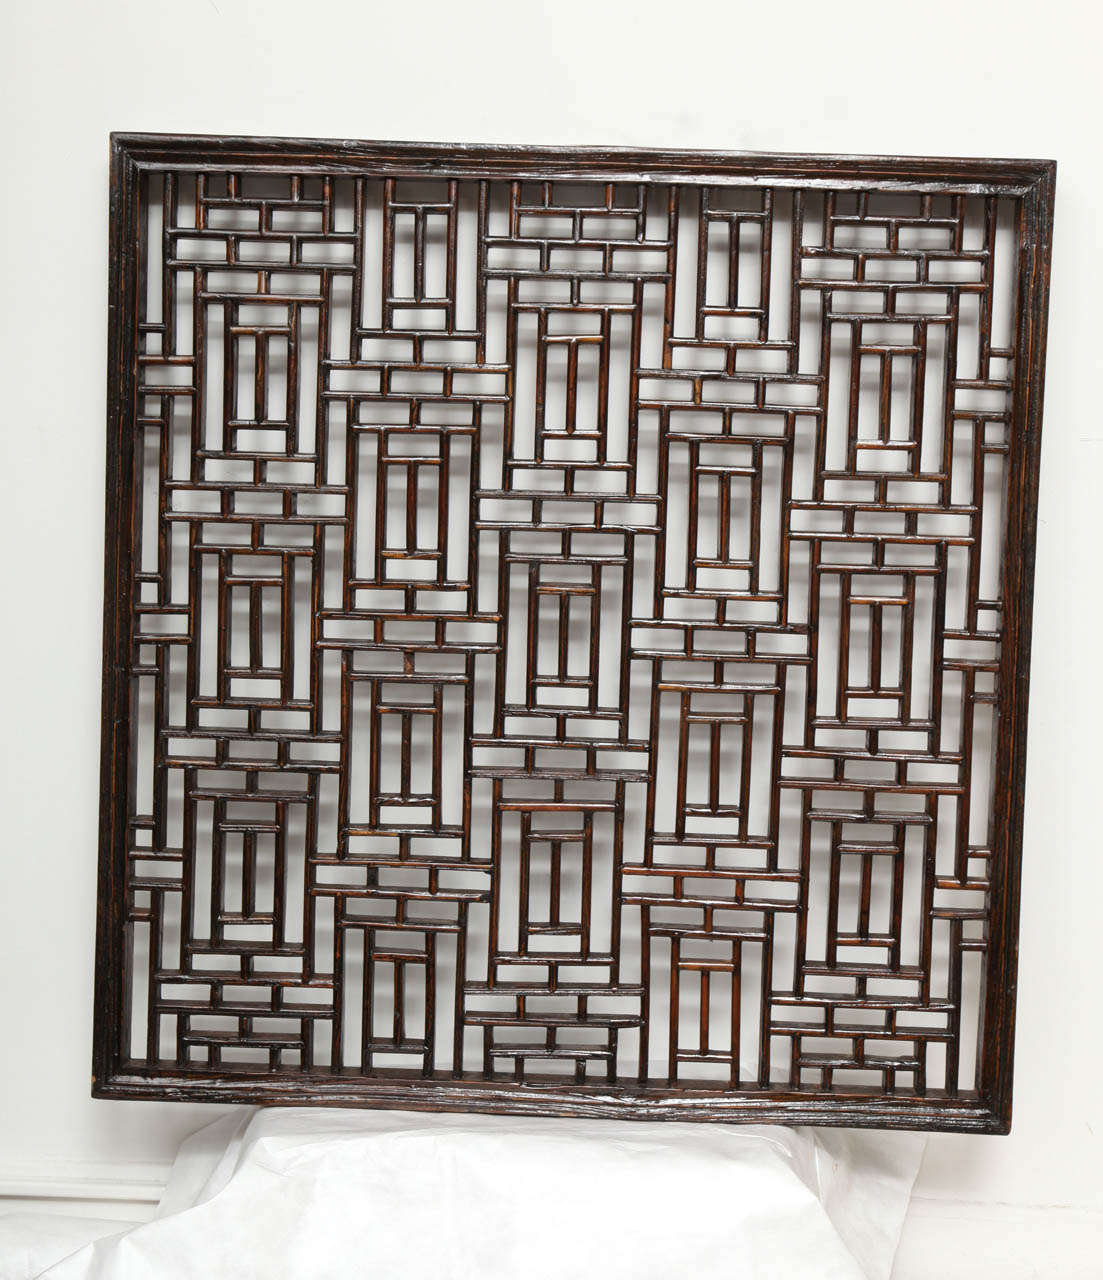 A wood lattice screen or panel in a traditional Chinese pattern.  Can be mirror backed.